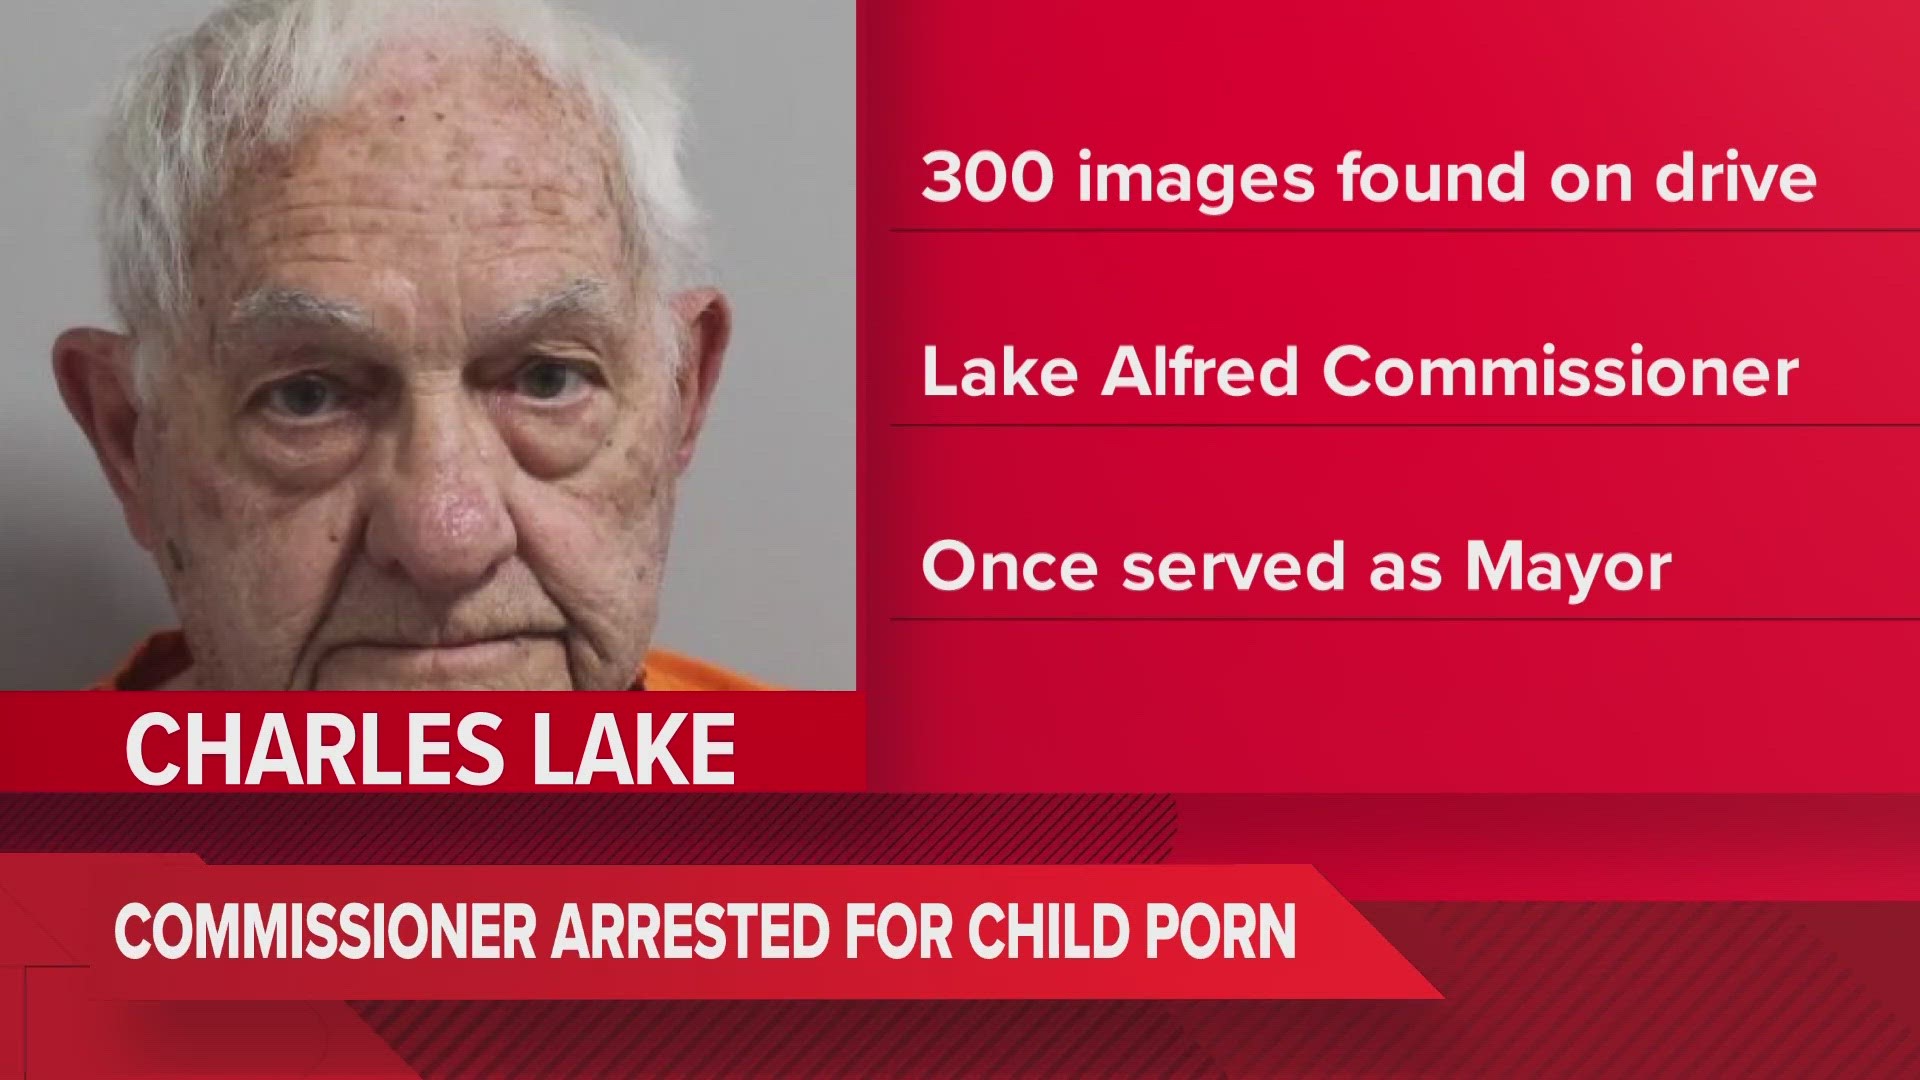 A Lake Alfred city commissioner was arrested for 300 counts of child pornography on Thursday.